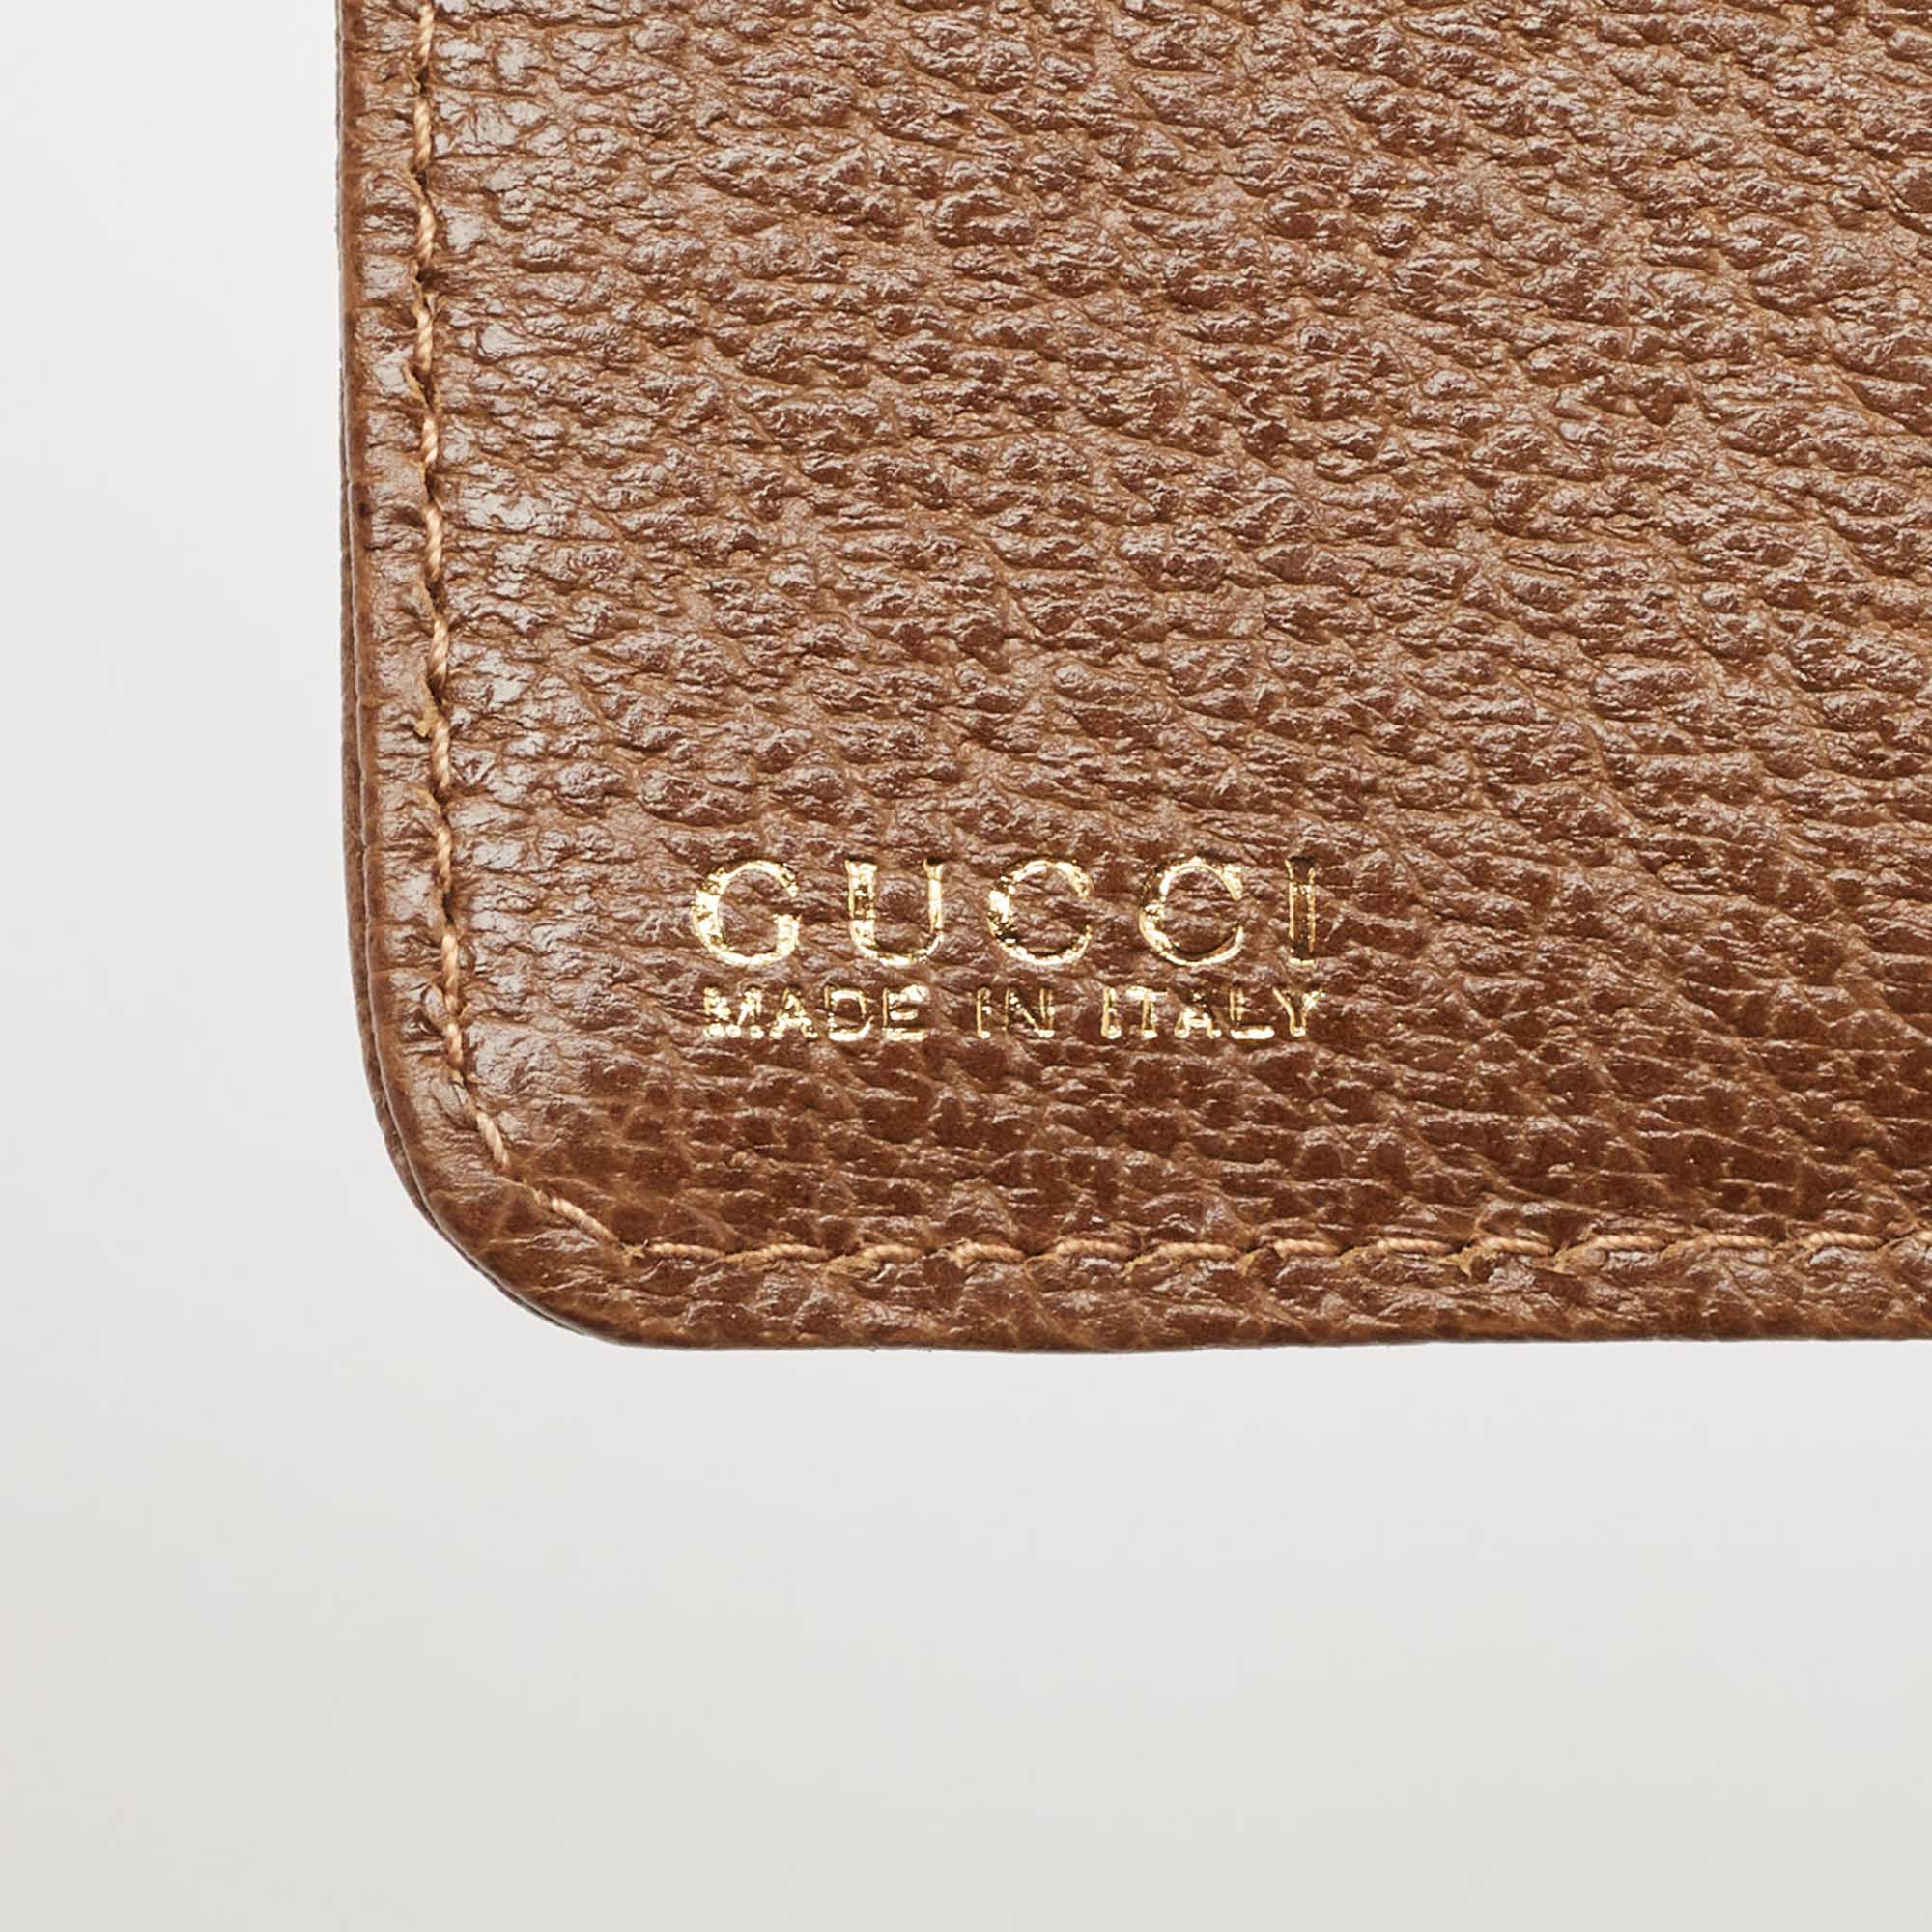 Gucci Brown Leather Slim Card Holder